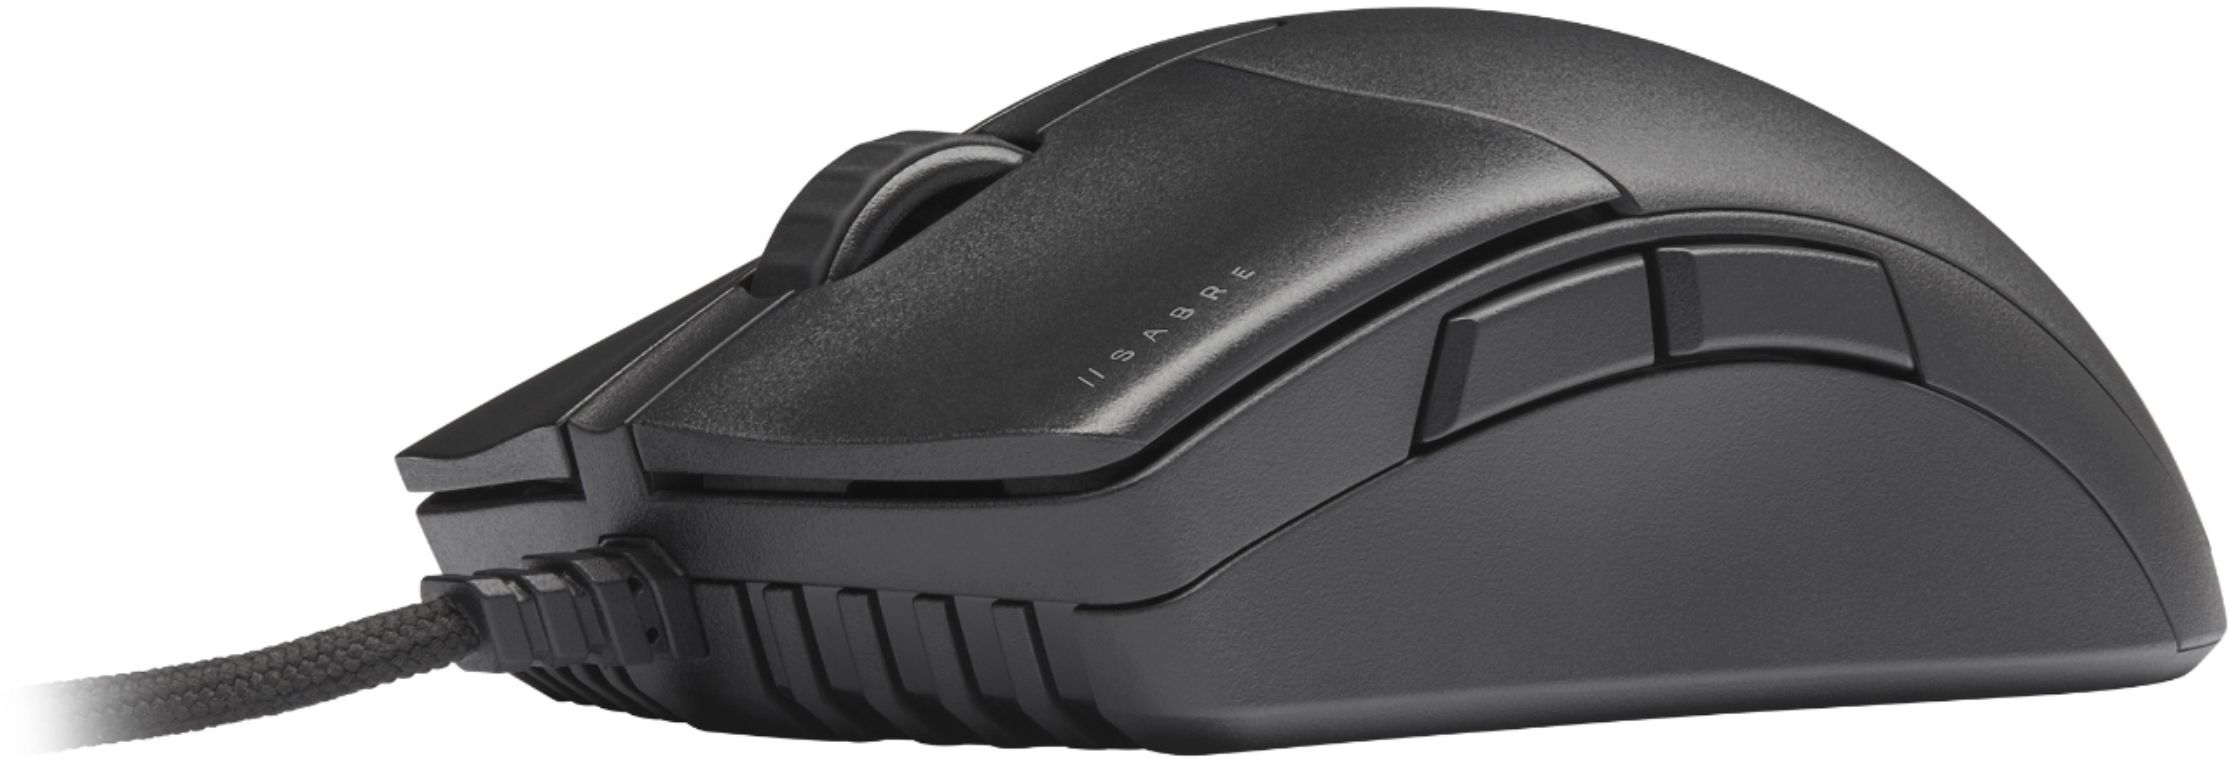 Left View: Arozzi - Favo Light Weight Gaming Mouse - Gray